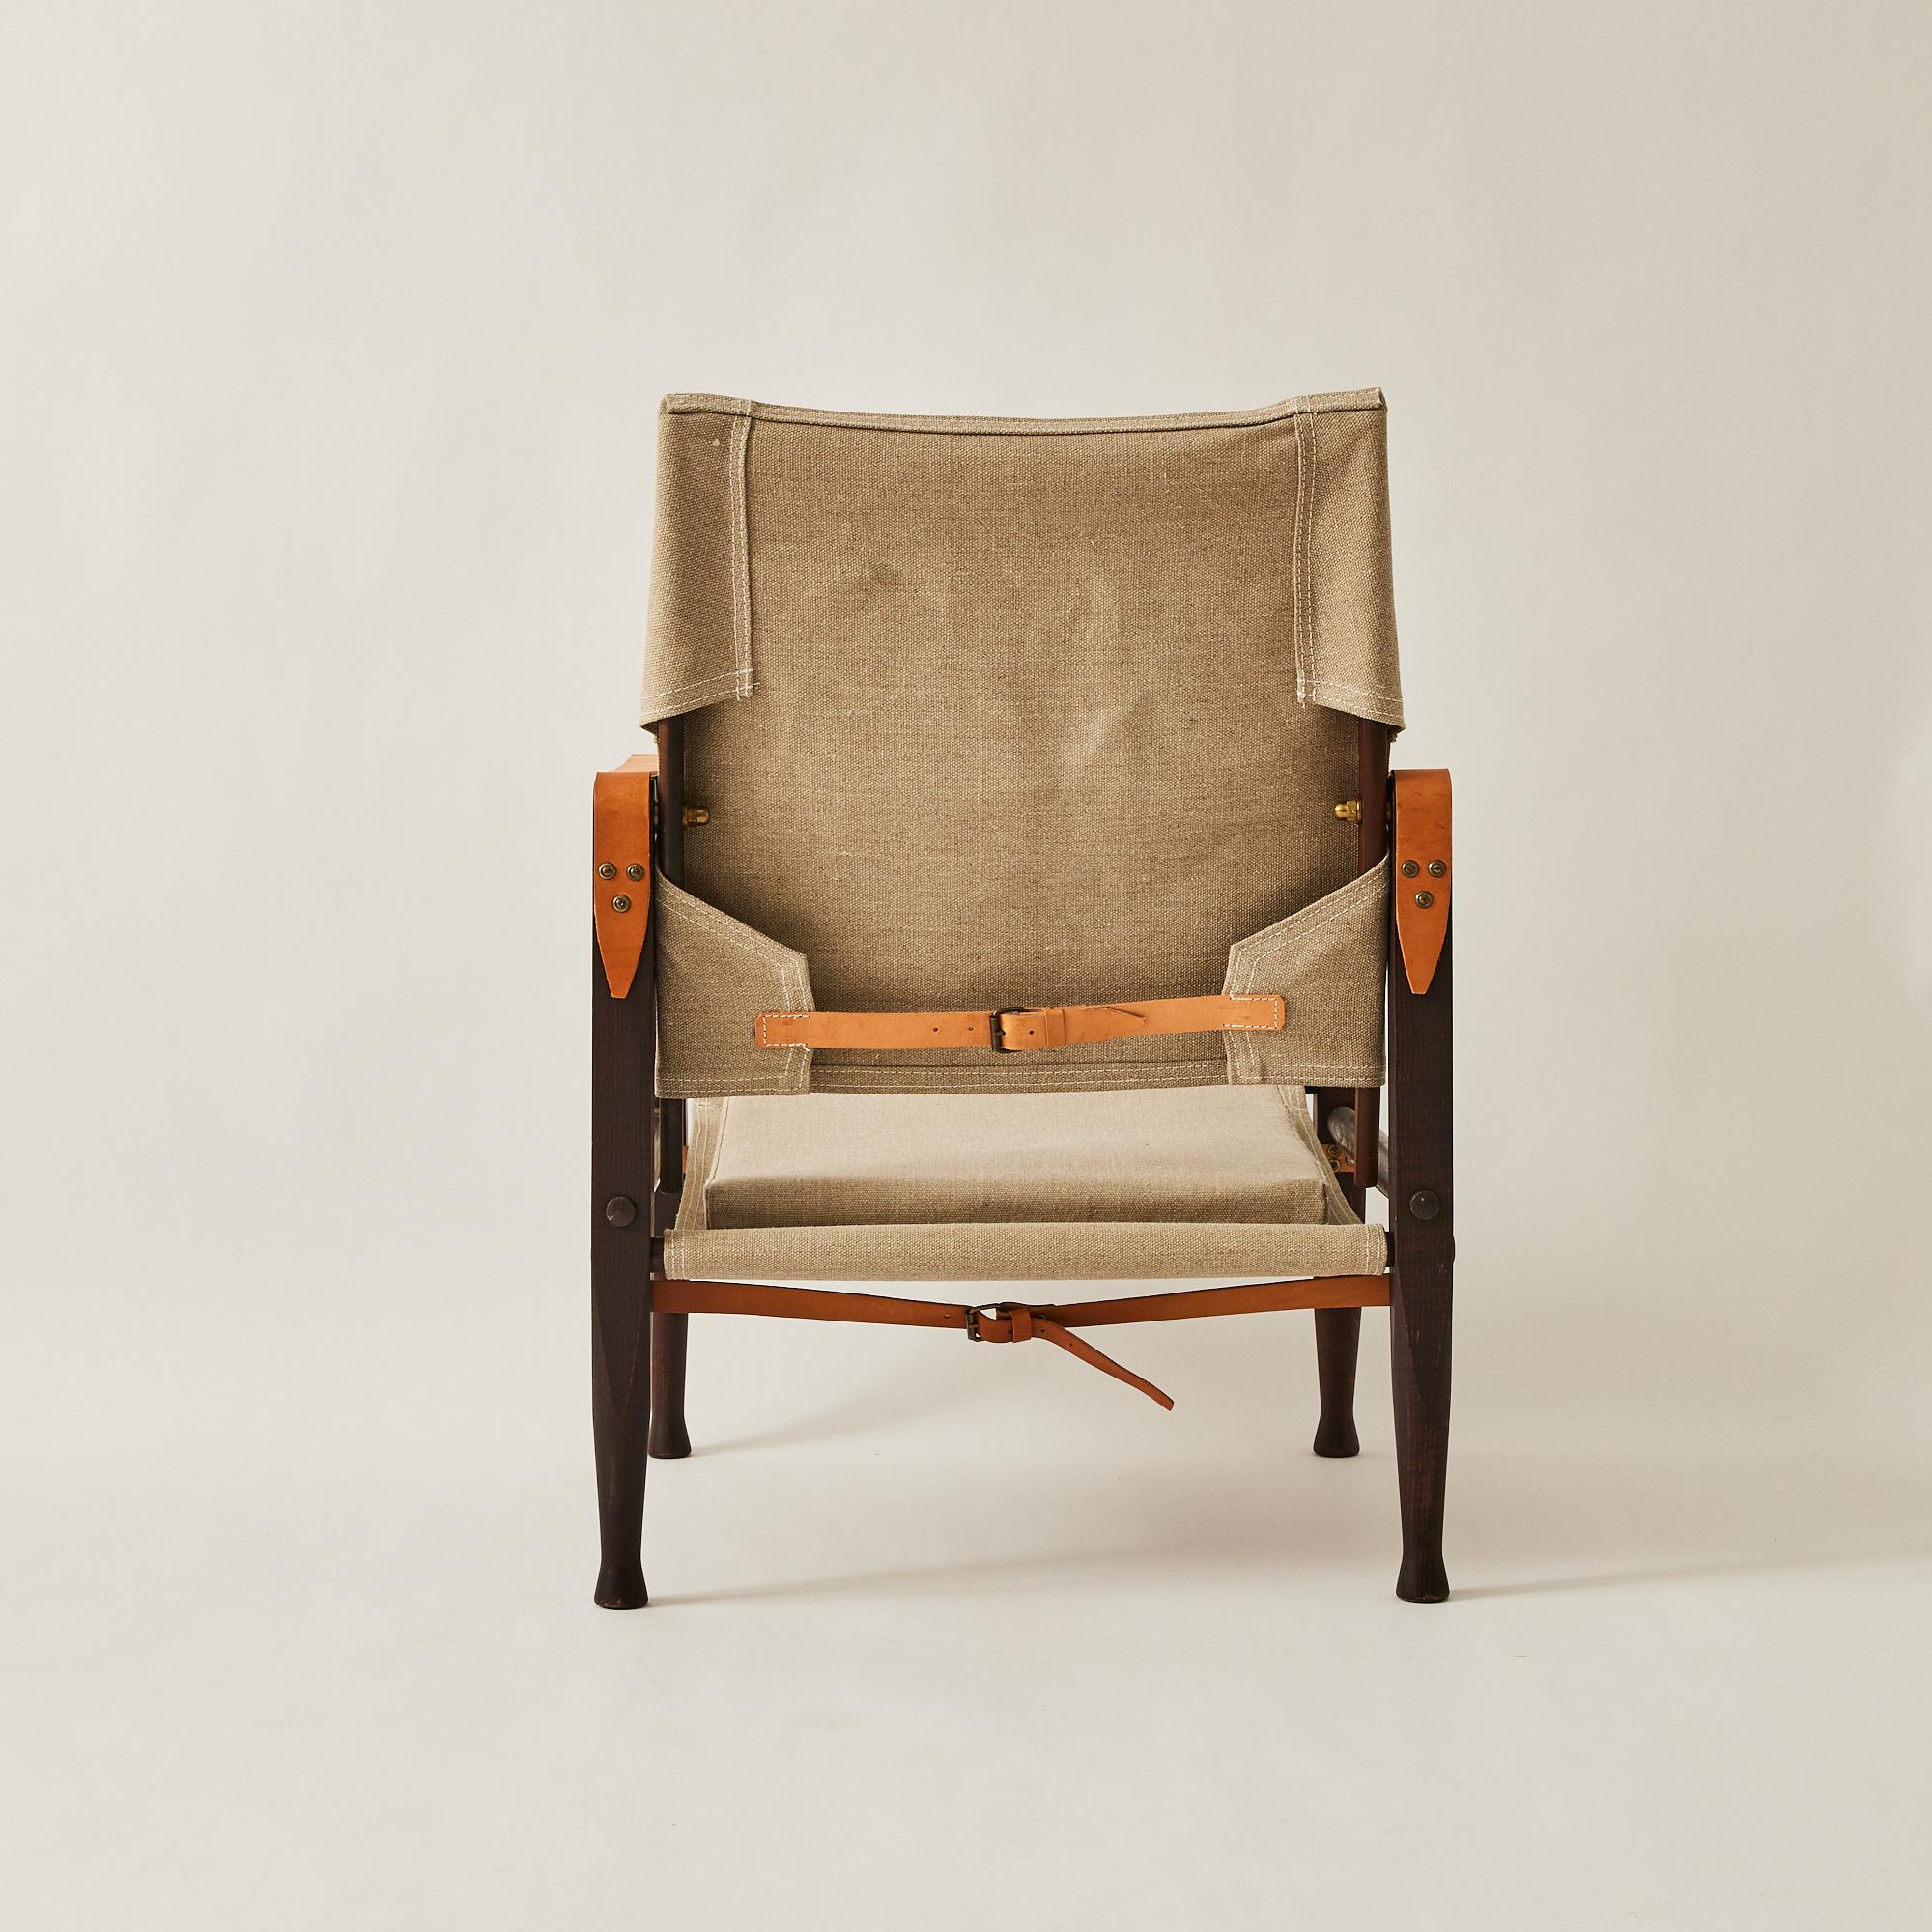 Kaare Klint Safari Chairs for Rud Rasmussen in Ash and Canvas- a Pair In Good Condition For Sale In Brooklyn, NY